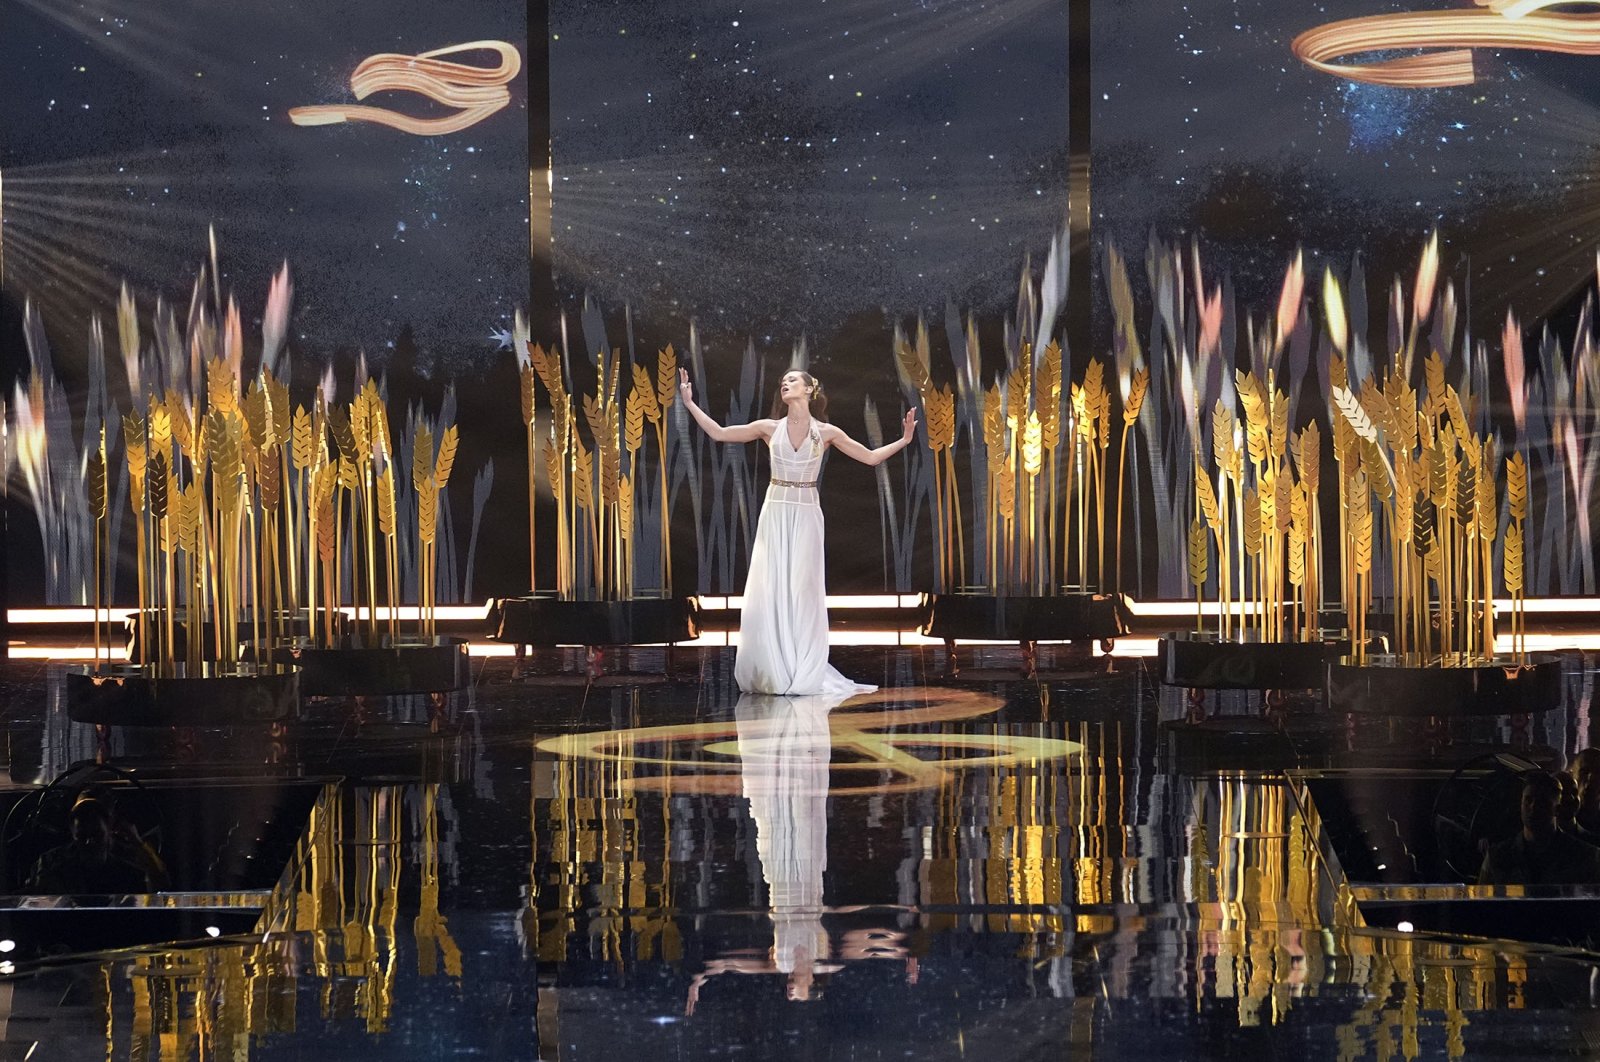 Tvorchi of Ukraine performs during the second semifinal at the Eurovision Song Contest in Liverpool, England, May 11, 2023. (AP Photo)